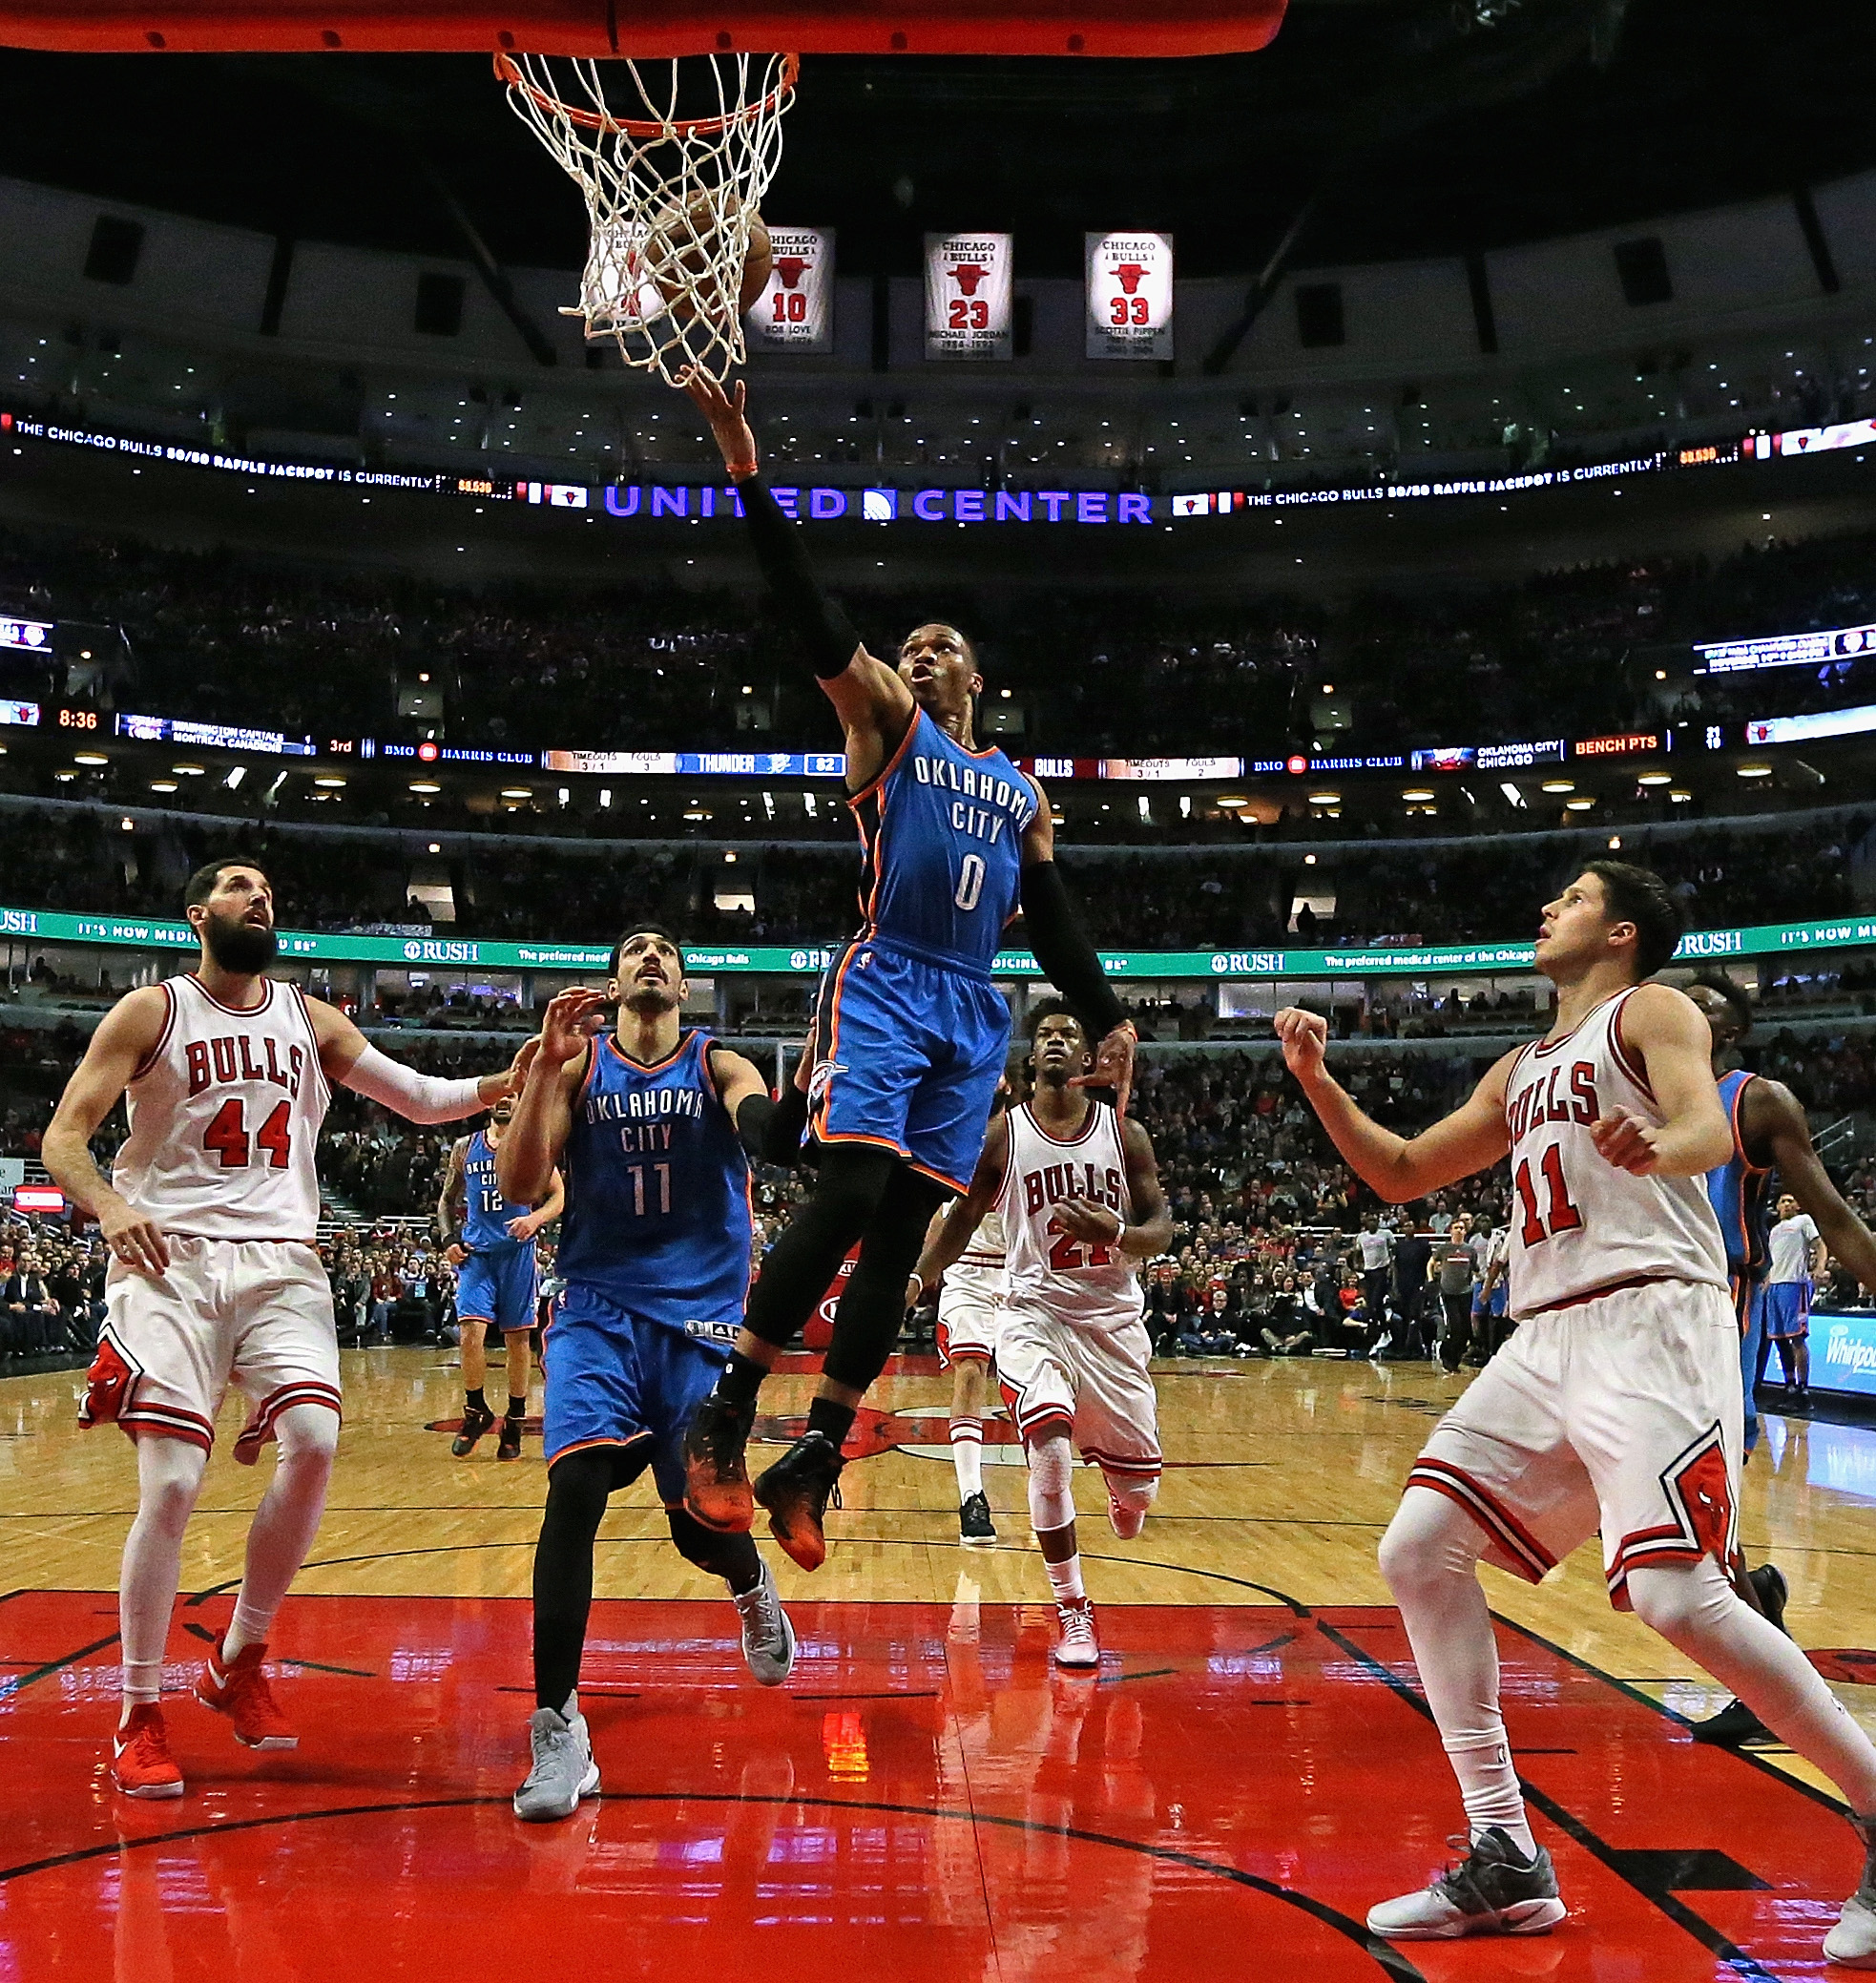 CHICAGO, IL - JANUARY 09: Russell Westbrook #0 of the Oklahoma City Thunder drives the lane between Nikola Mirotic #44 and Doug McDermott #11 of the Chicago Bulls at the United Center on January 9, 2017 in Chicago, Illinois. The Thunder defeated the Bulls 109-94. NOTE TO USER: User expressly acknowledges and agrees that, by downloading and/or using this photograph, user is consenting to the terms and conditions of the Getty Images License Agreement.   Jonathan Daniel/Getty Images/AFP